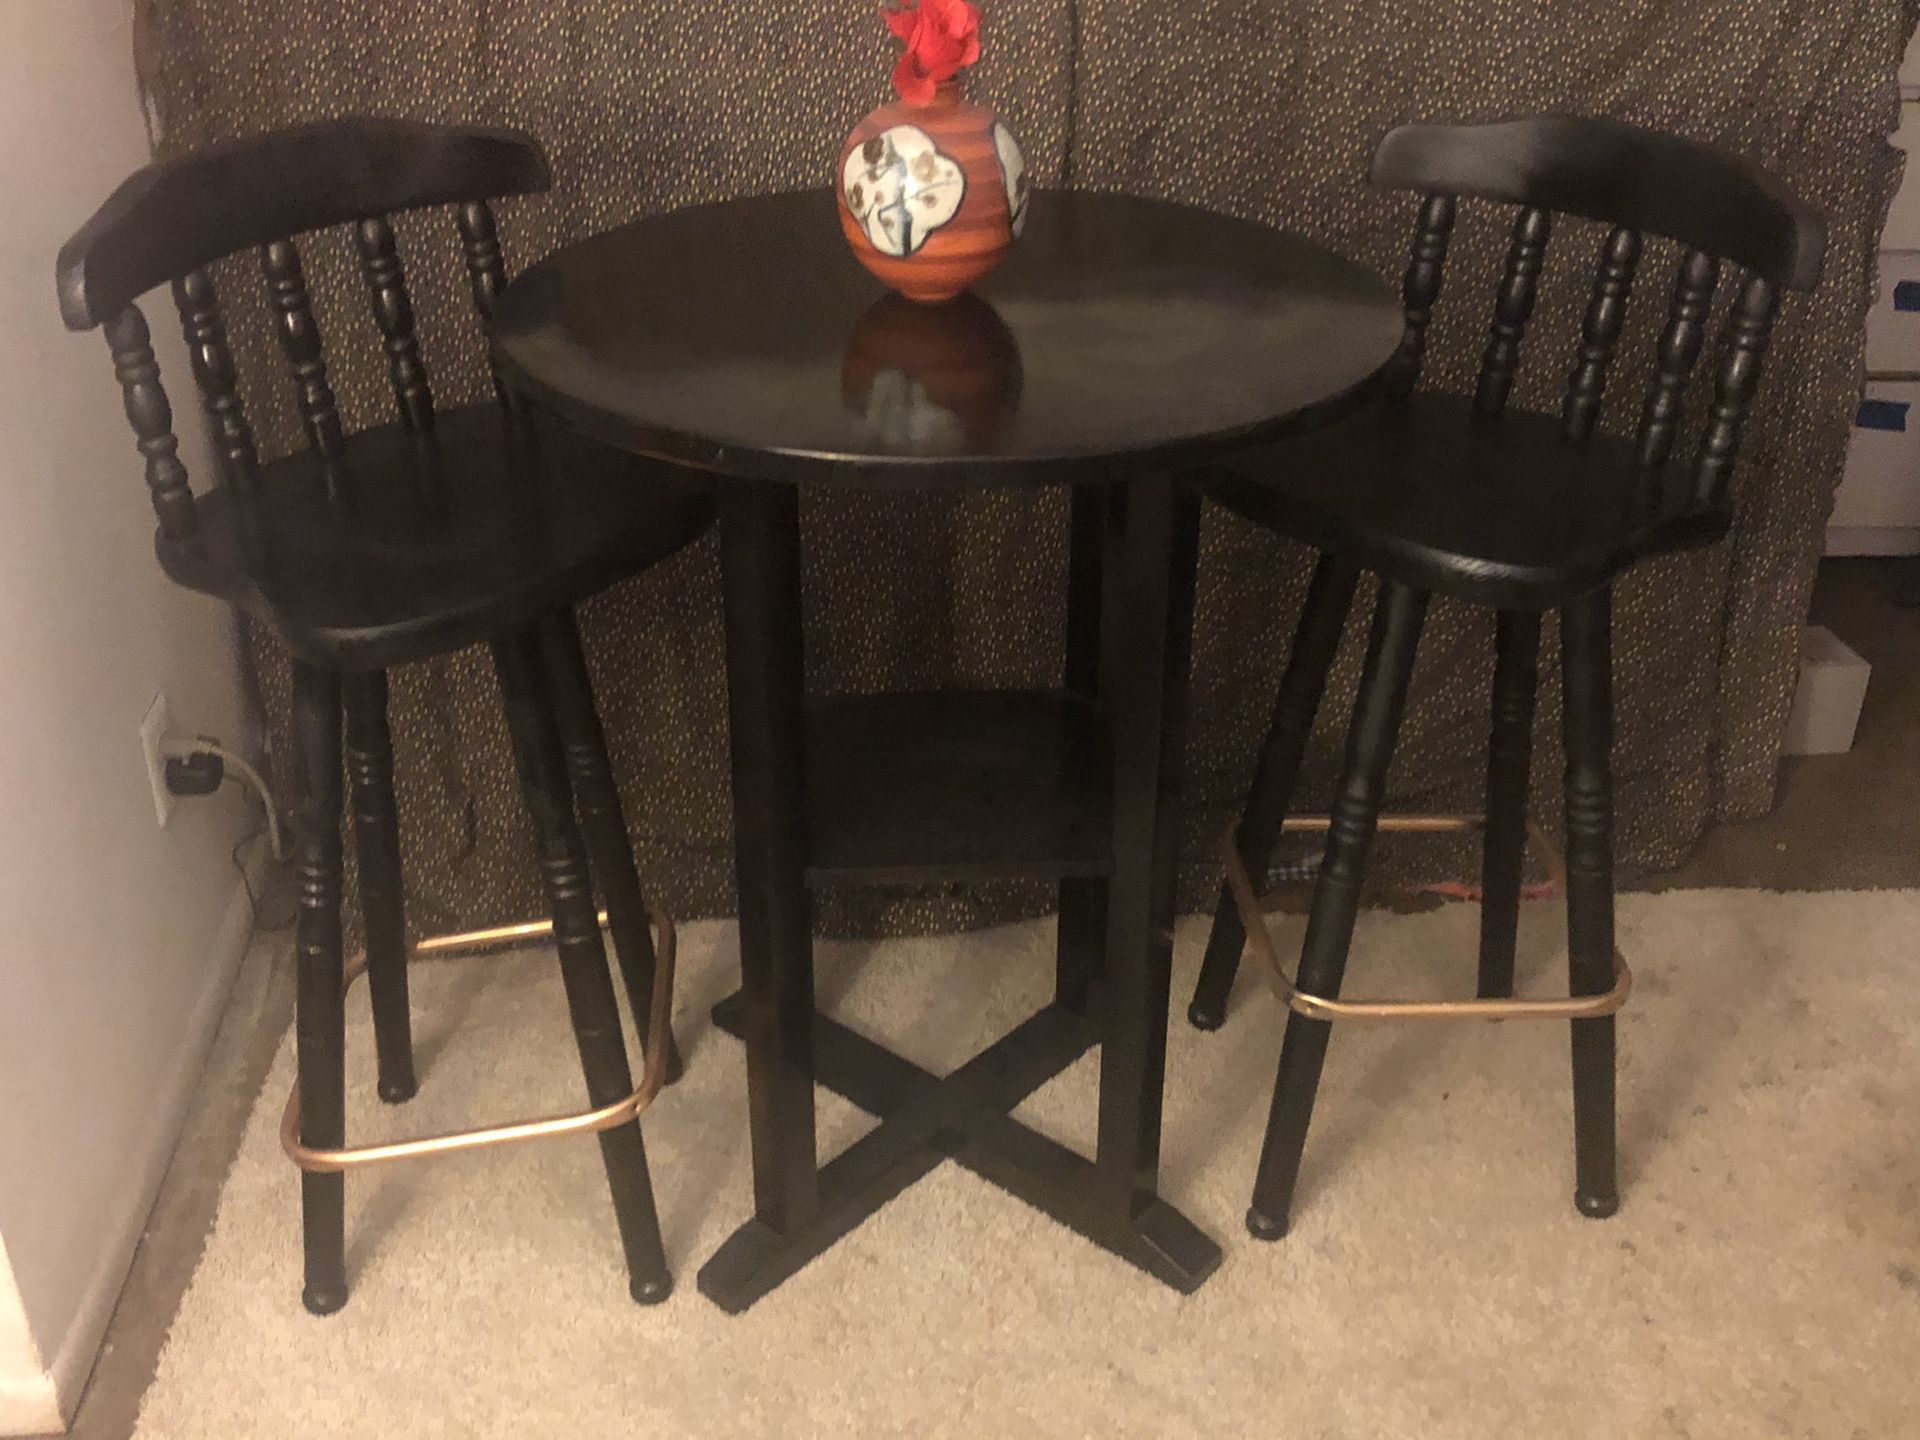 Black and Gold bar table from world market and MCM stools 4 of them